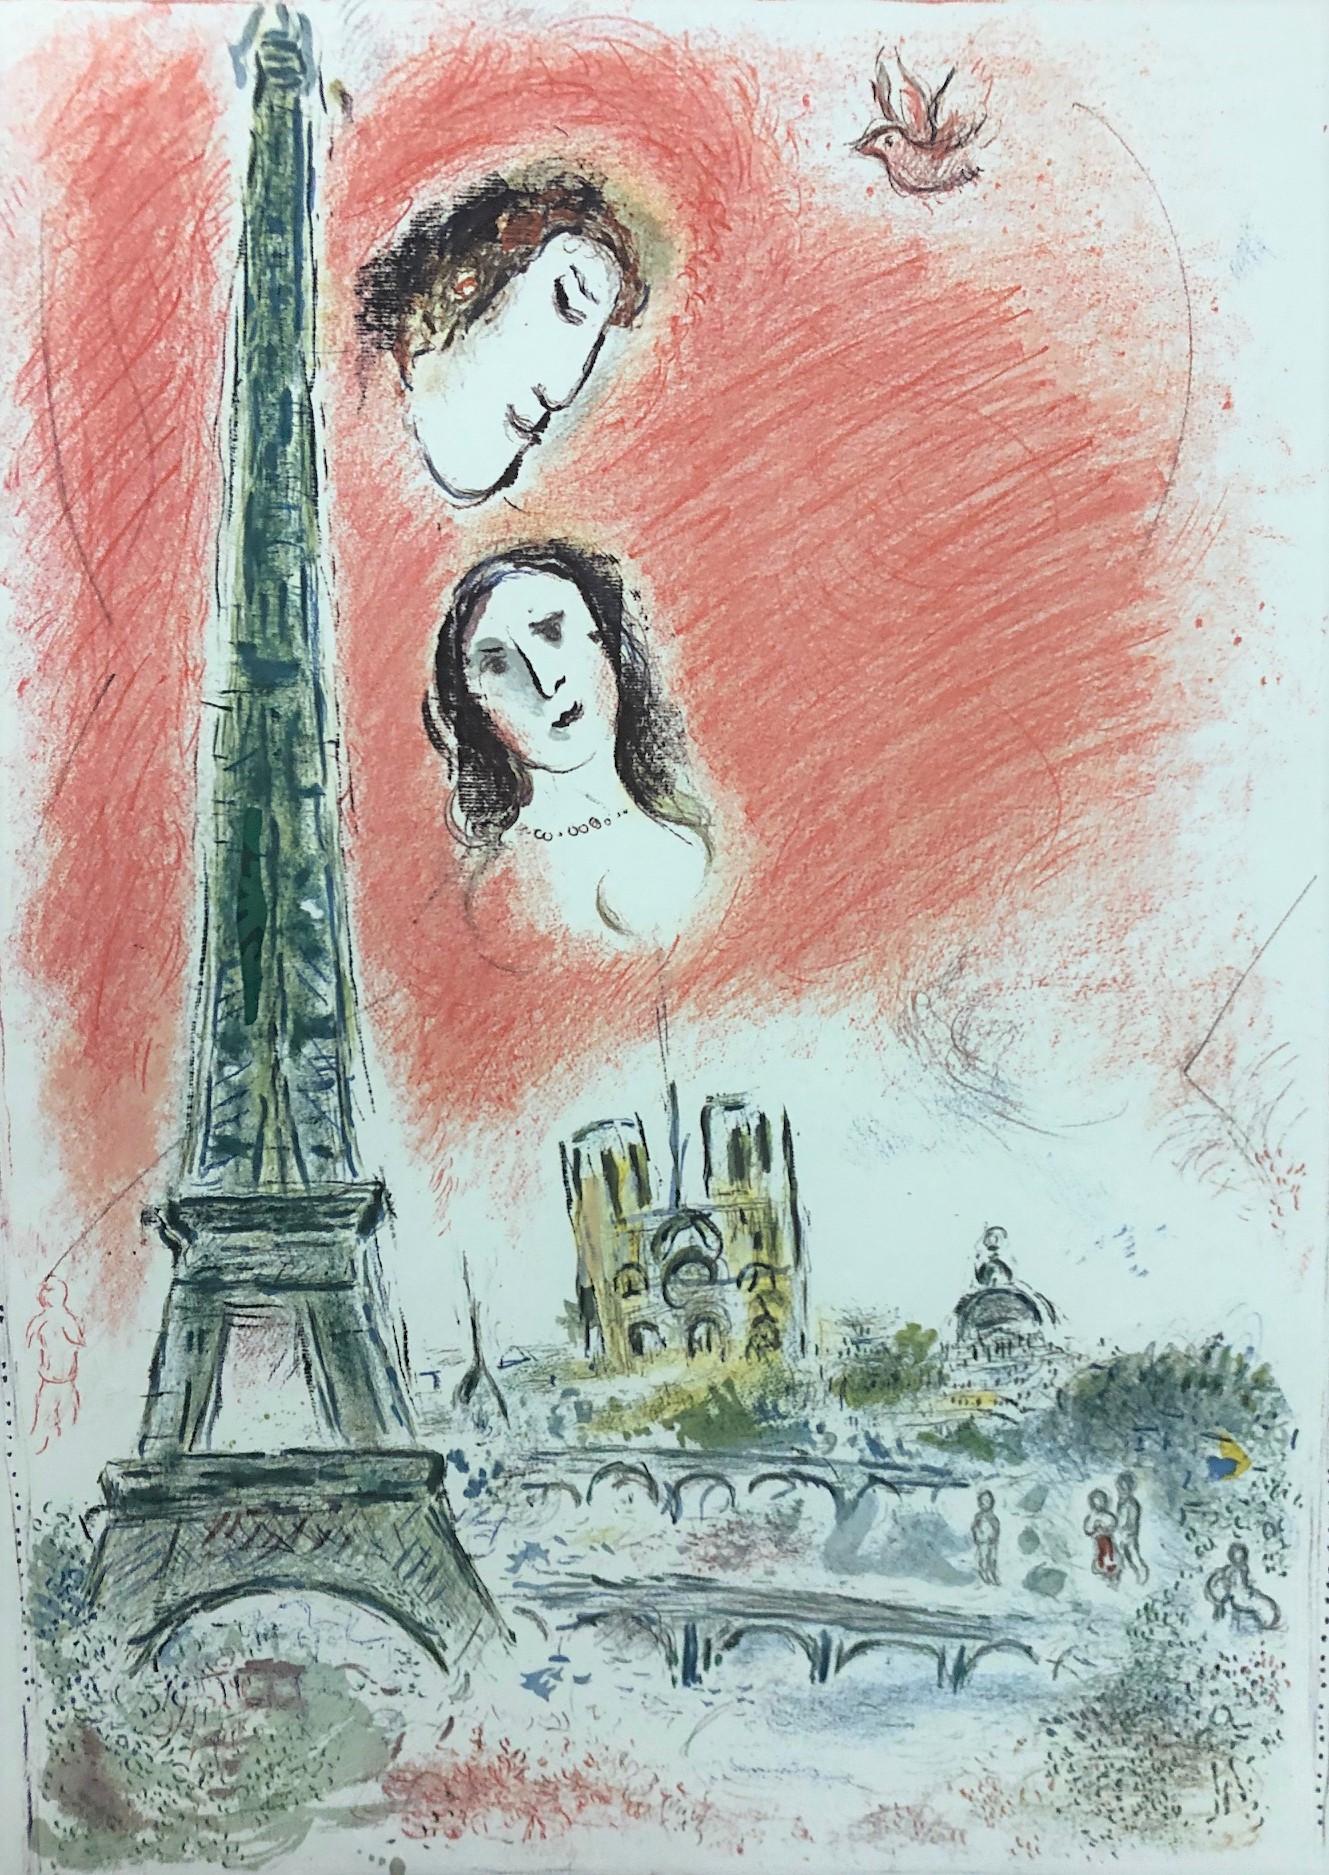 Chagall, Dali, and Picasso Poster- Musée de L'Athénée, 1972 - Print by Marc Chagall